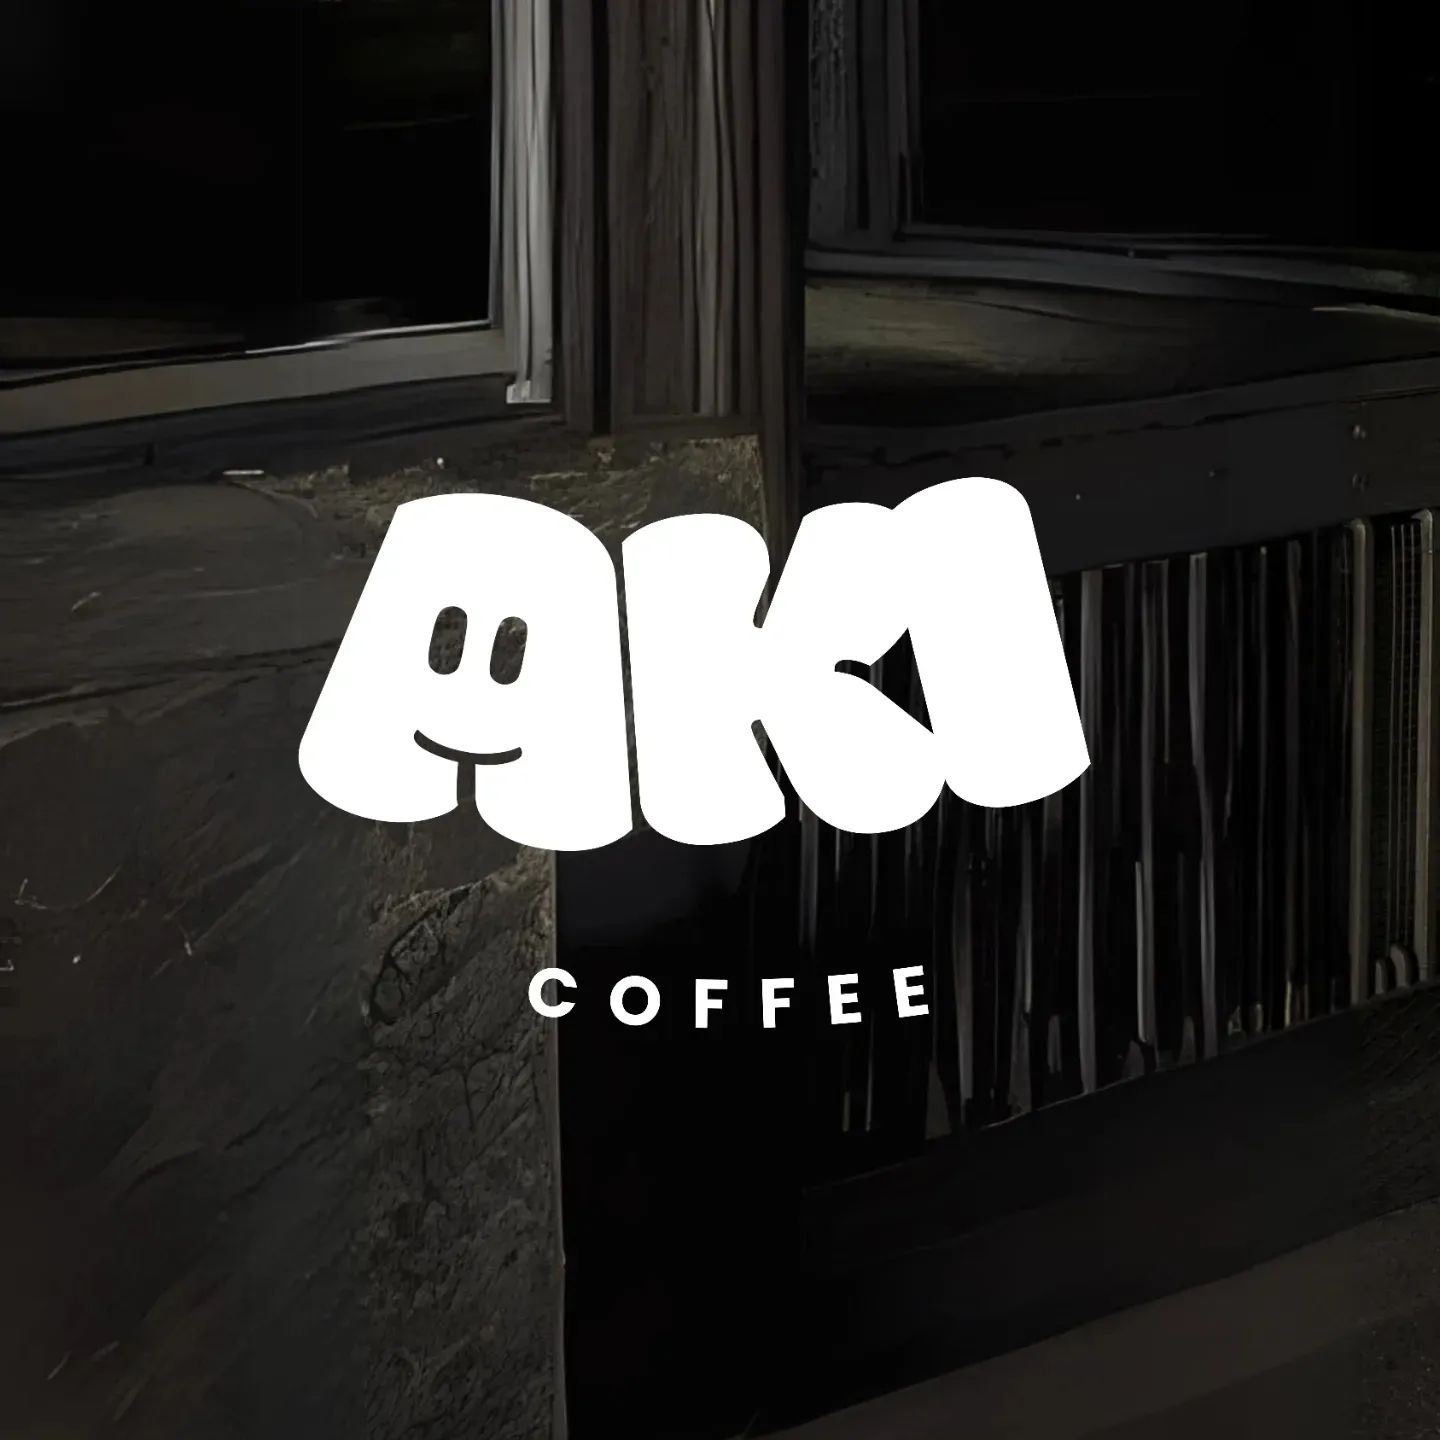 Aki Coffee—Brand Identity

A modern cafe in Amsterdam that serves freshly brewed coffee and offers cozy spots to sit and